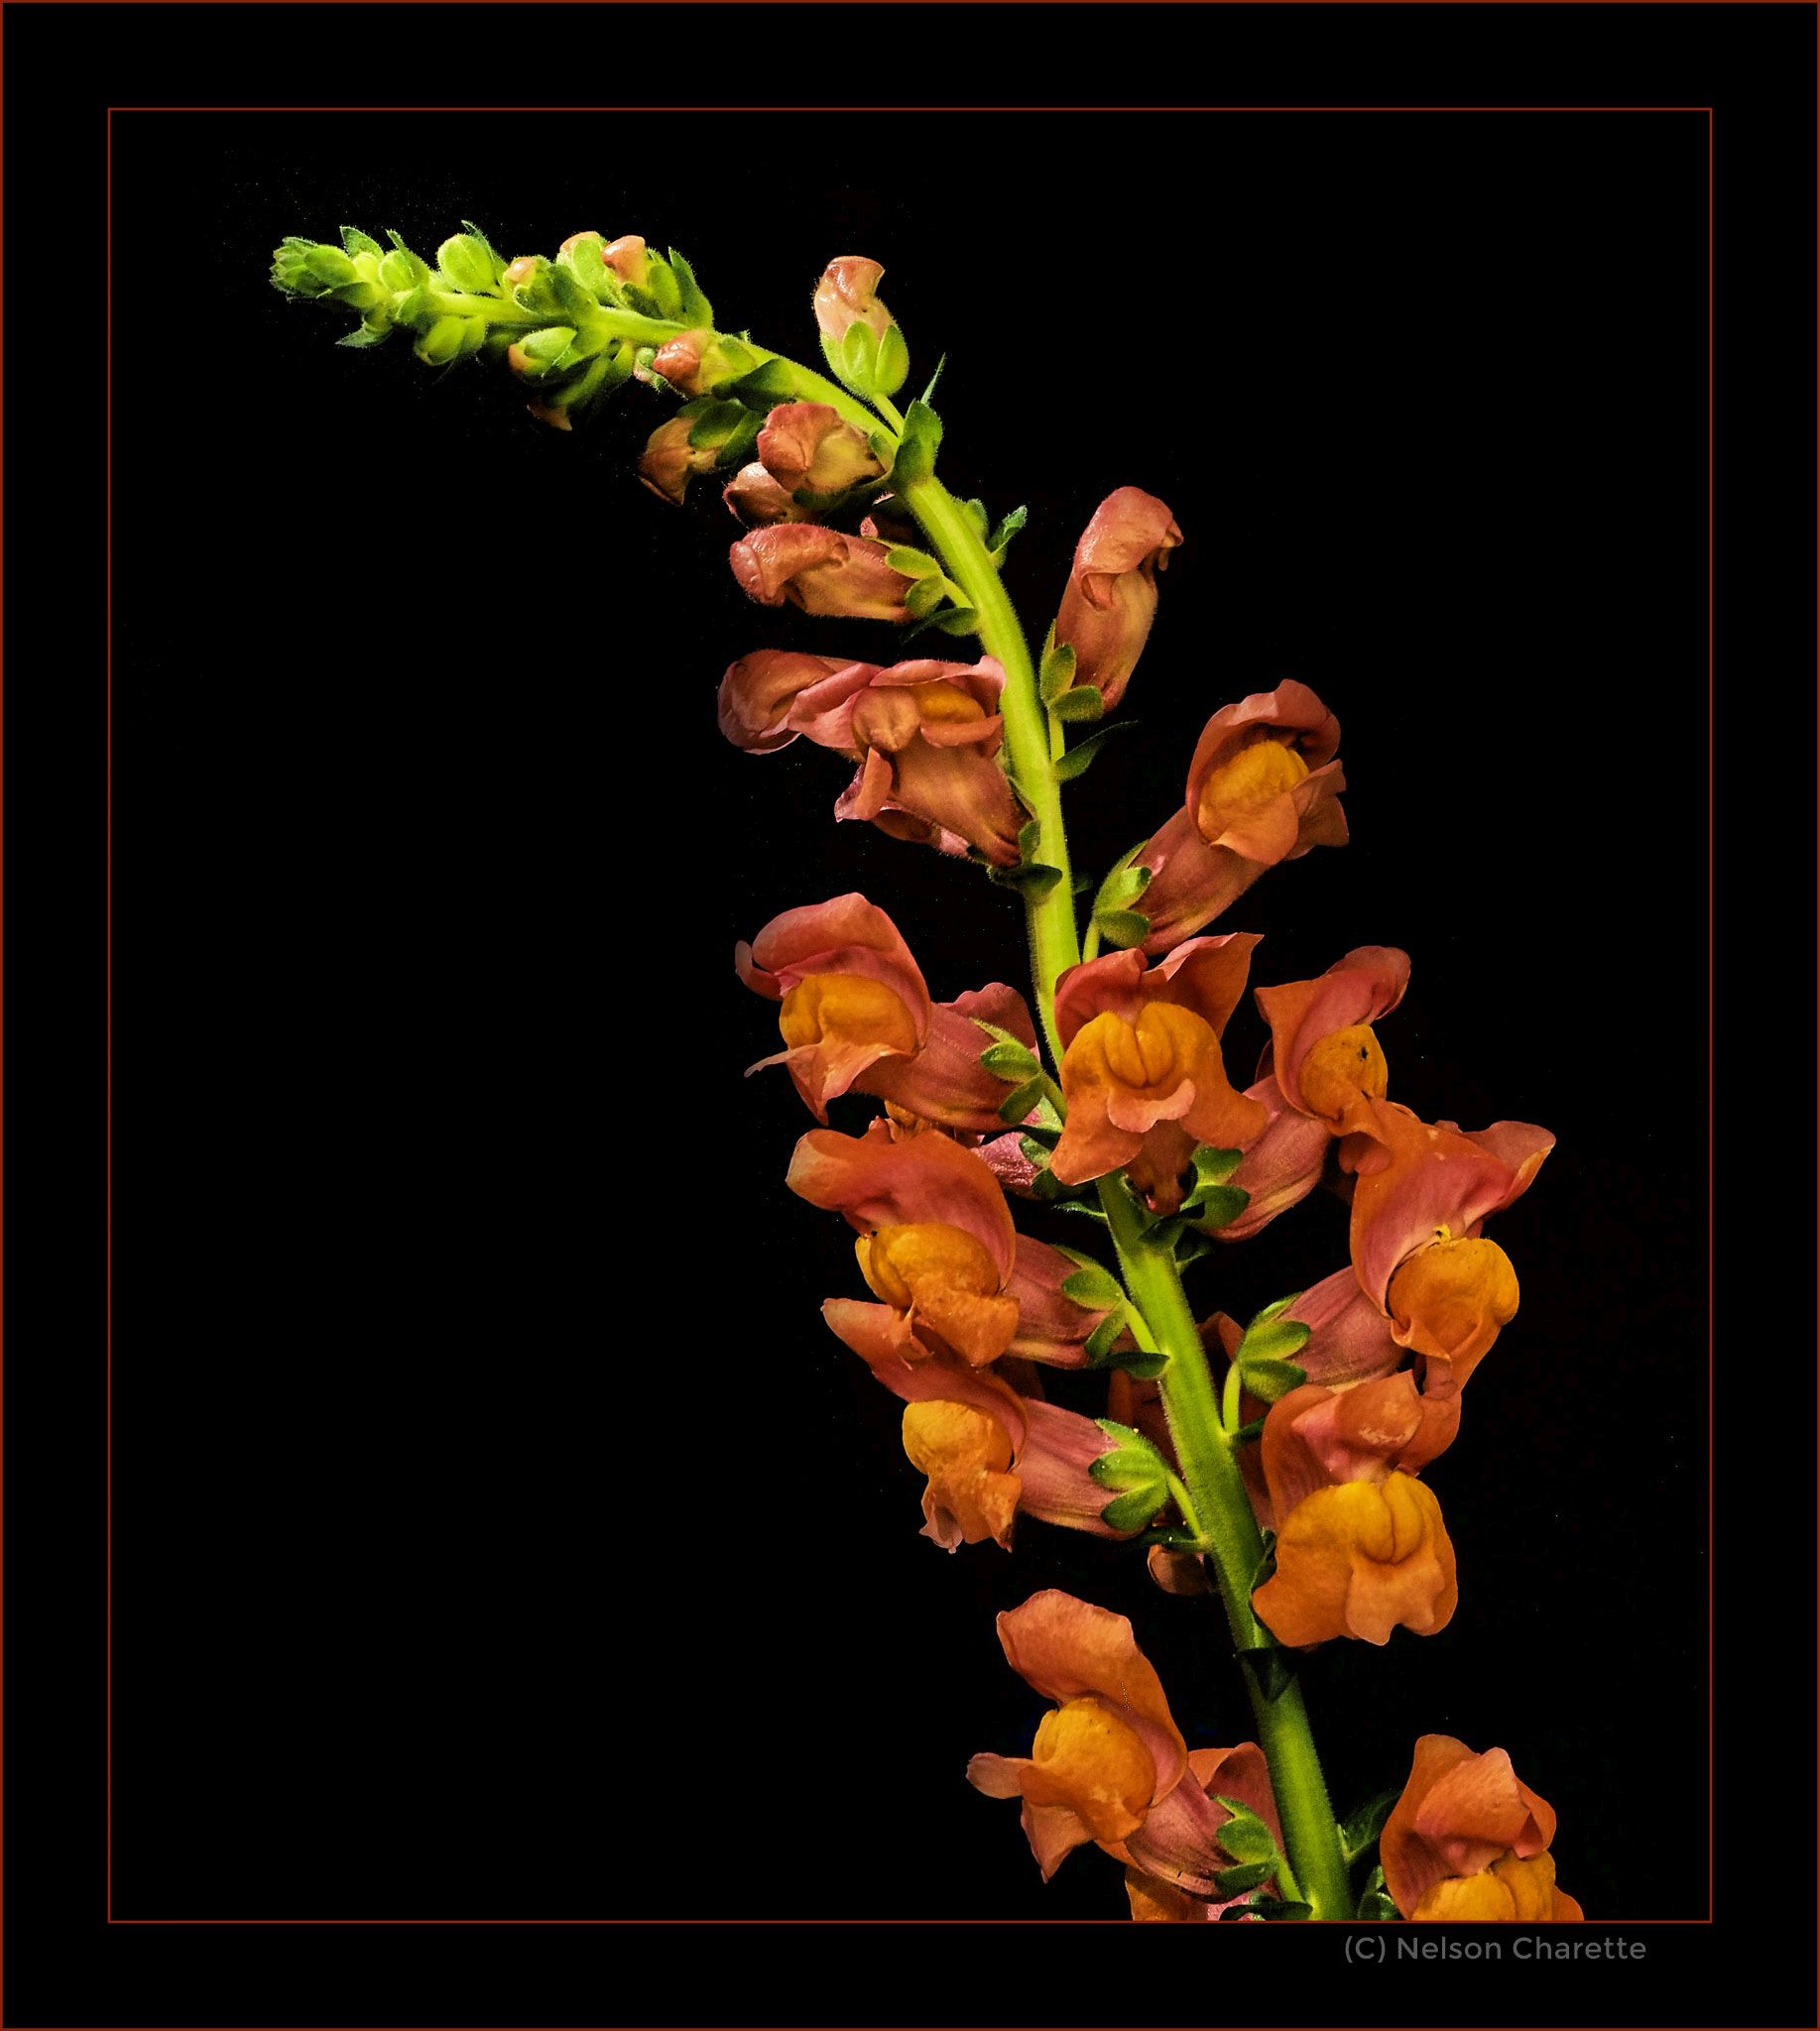 Snapdragon by Nelson Charette